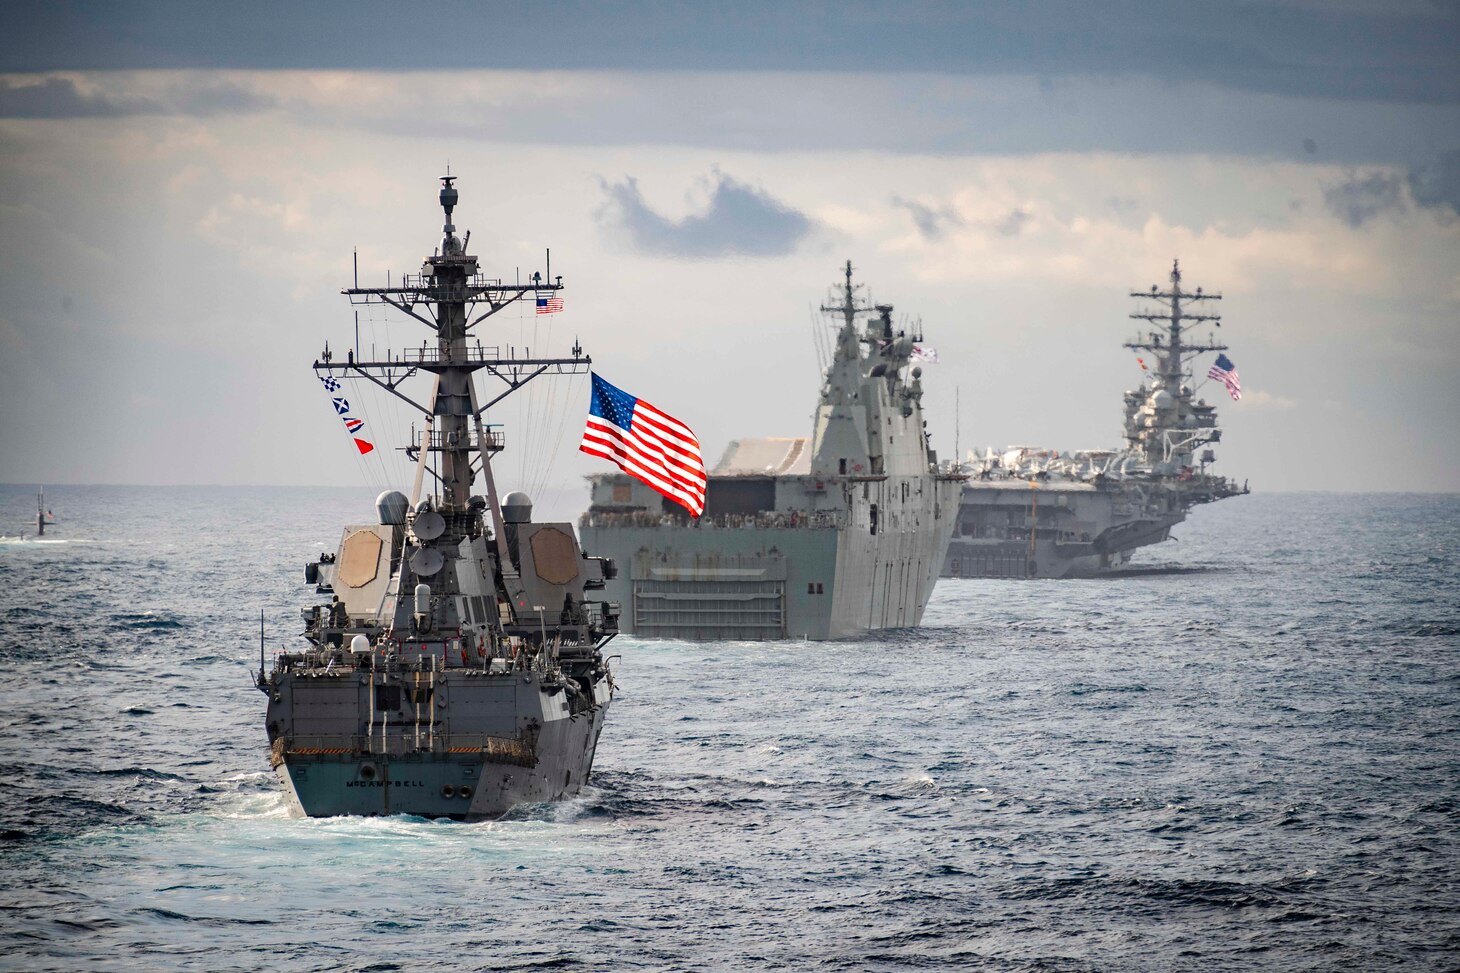 190711-N-WI365-1052 TASMAN SEA (July 11, 2019) – The amphibious dock landing ship USS Ashland (LSD 48) sails in formation behind the Arleigh Burke-class guided-missile destroyer USS McCampbell (DDG 85), center, the Royal Australian Navy Canberra-class landing helicopter dock HMAS Canberra (L02), left, the U.S. Navy Los Angeles-class submarine attack USS Key West (SSN 722), far left, and the U.S. Navy’s Nimitz-class aircraft carrier USS Ronald Reagan (CVN 76), during Talisman Sabre 2019. Ashland, part of the Wasp Amphibious Ready Group, with embarked 31st Marine Expeditionary Unit, is currently participating in Talisman Sabre 2019 off the coast of Northern Australia. A bilateral, biennial event, Talisman Sabre is designed to improve U.S. and Australian combat training, readiness and interoperability through realistic, relevant training necessary to maintain regional security, peace and stability.